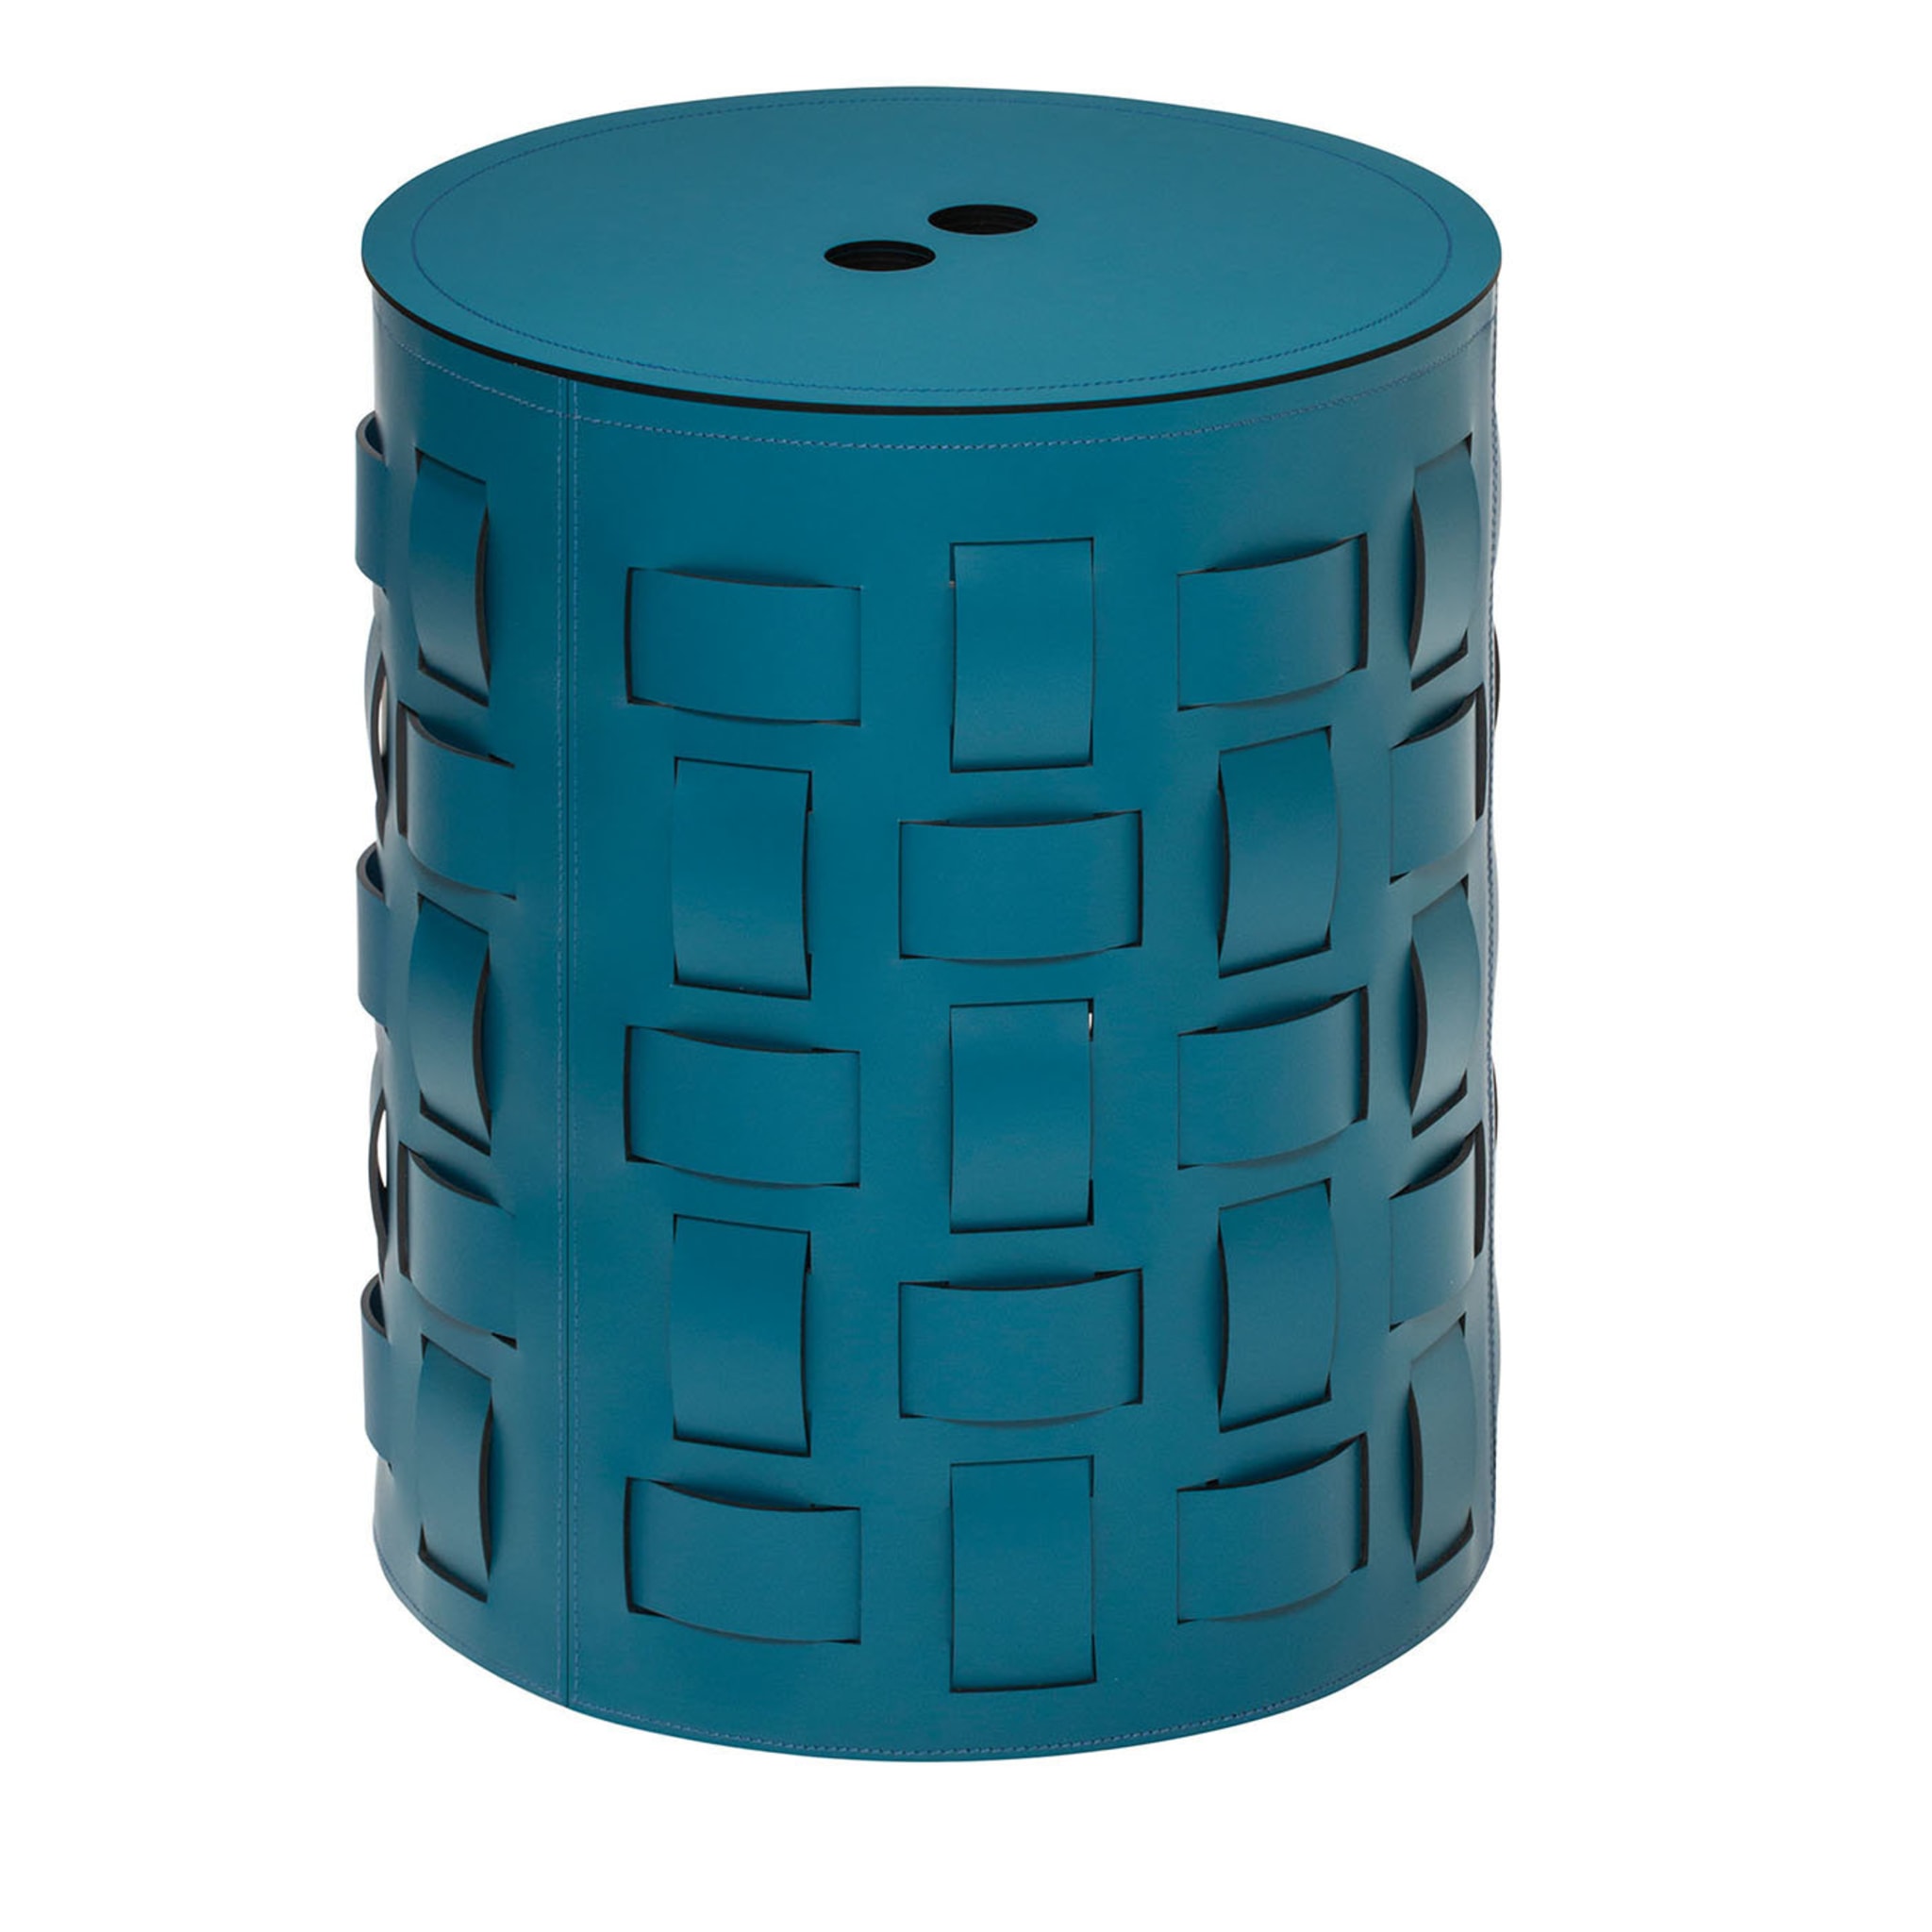 Lisbona N. 12 Petrol Blue Round Basket with Lid - Main view